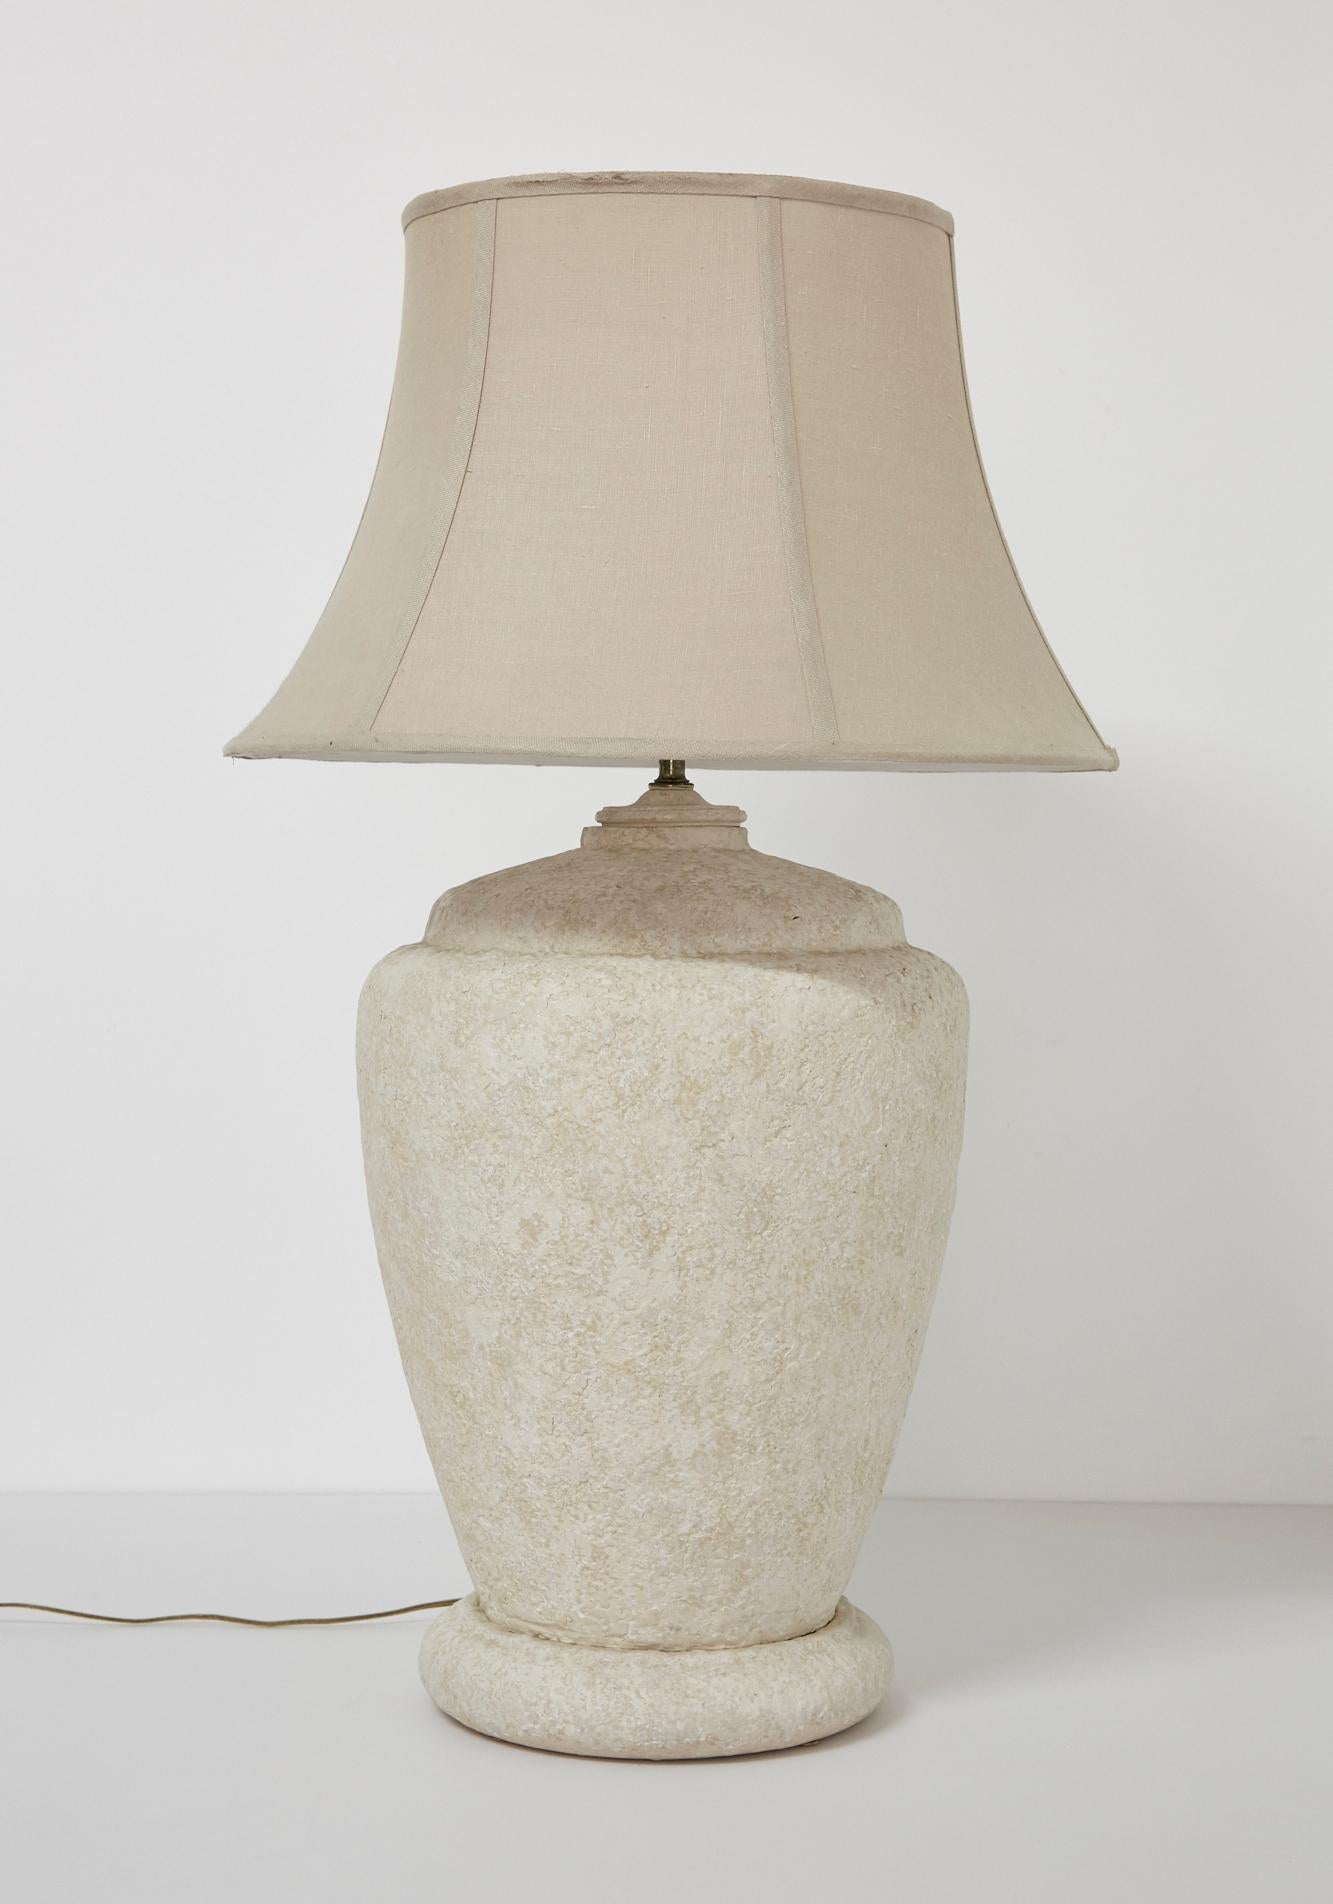 Postmodern urn-shaped ceramic table lamp in a very large size with real presence. Textured mottled cream colored neutral finish. Brass neck.

Underside stamped with maker's mark.

Body of lamp only measures 23 in. high.

Shade not included.